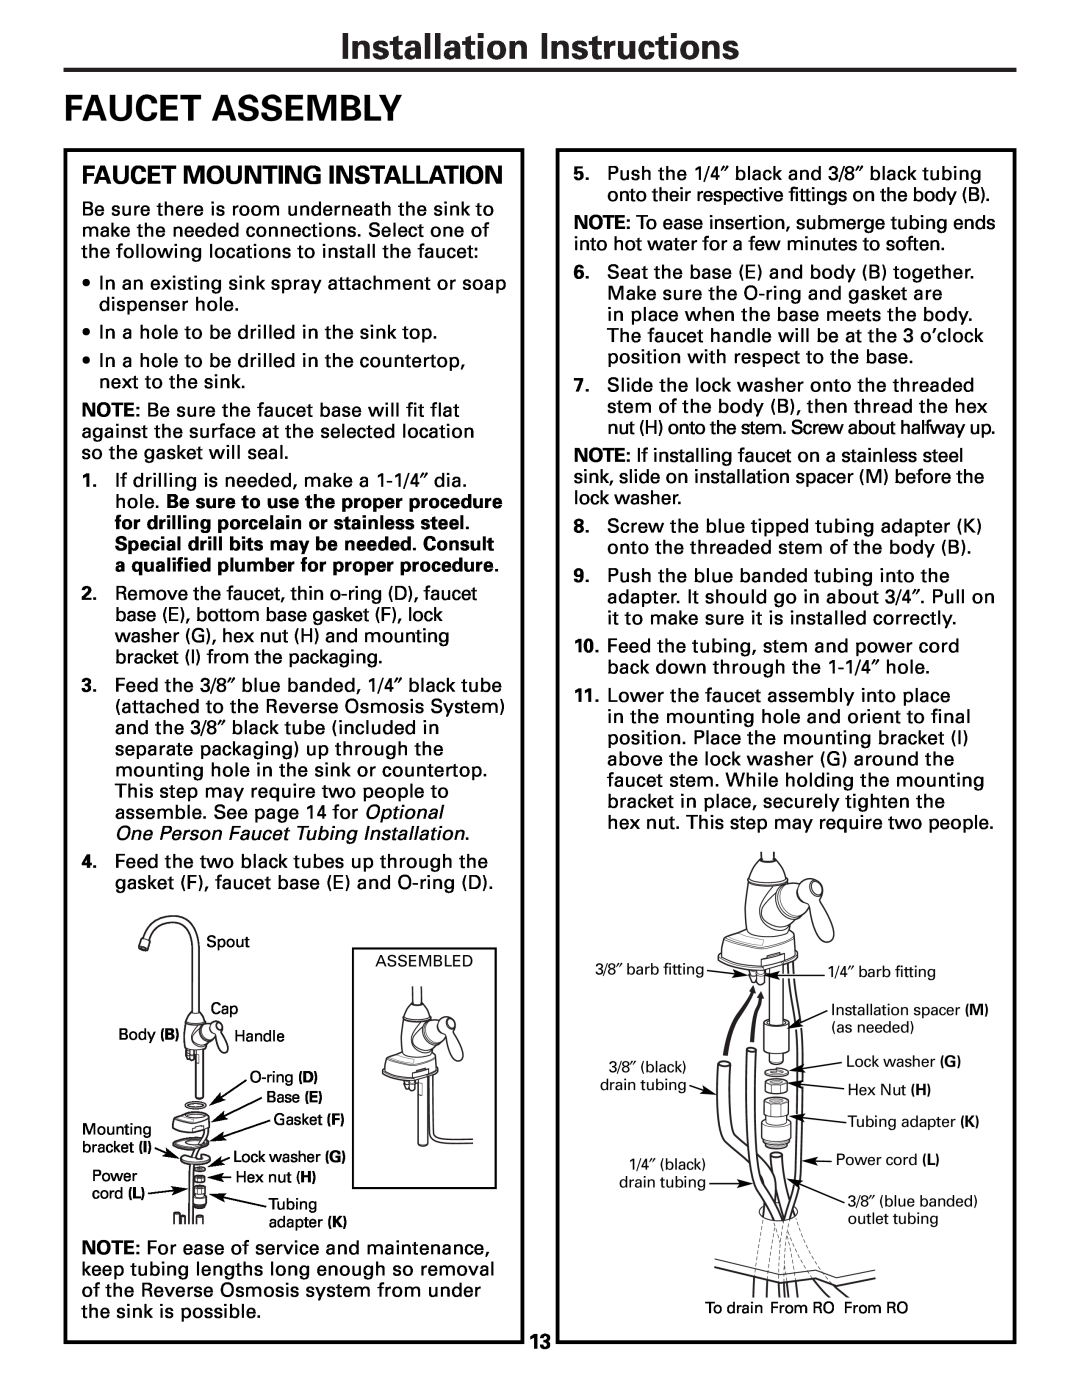 GE PNRQ21LRB, PNRQ21LBN owner manual Installation Instructions FAUCET ASSEMBLY, Faucet Mounting Installation 